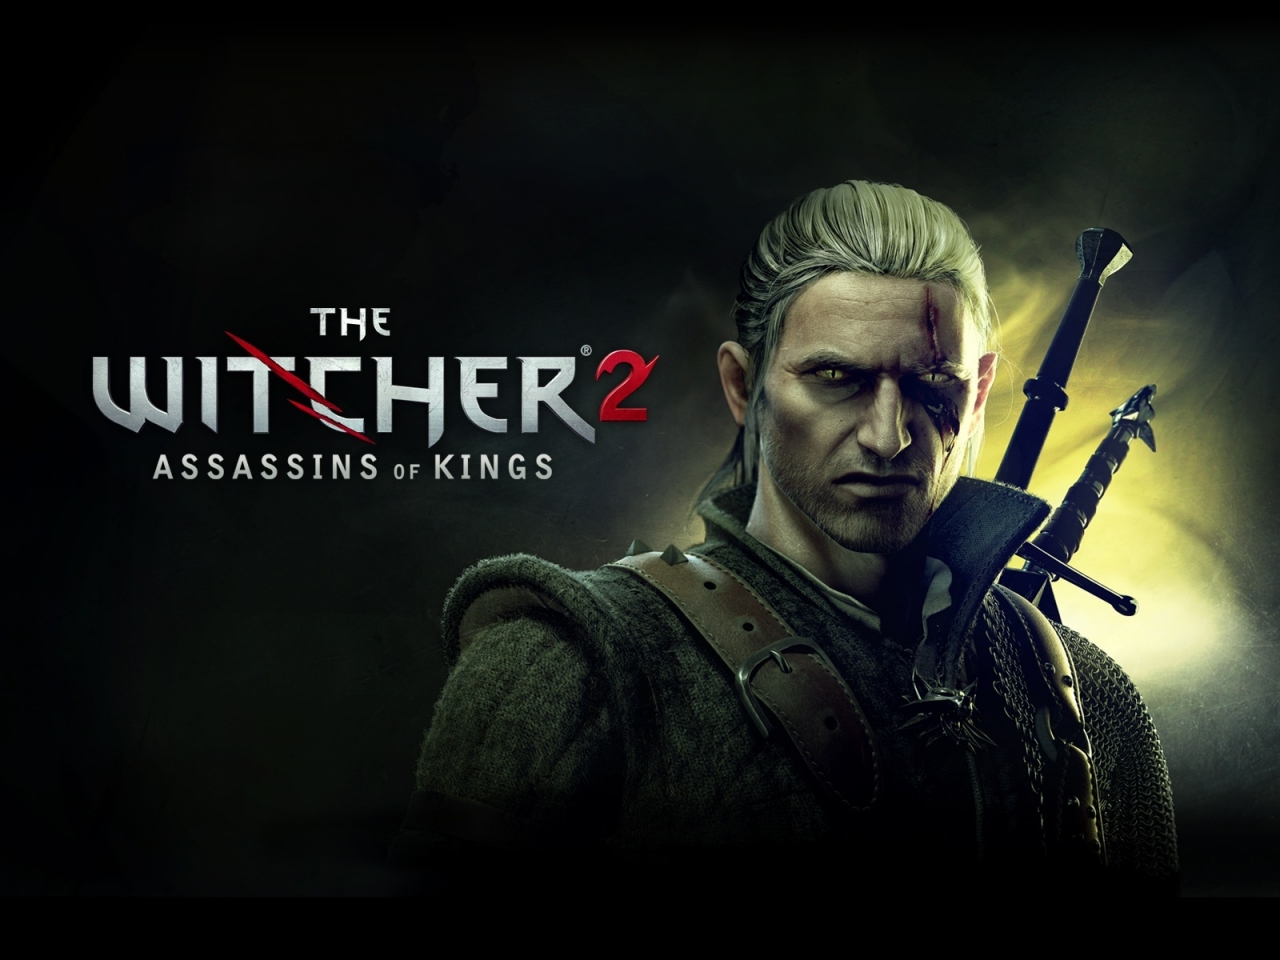 The Witcher 2 for 1280 x 960 resolution